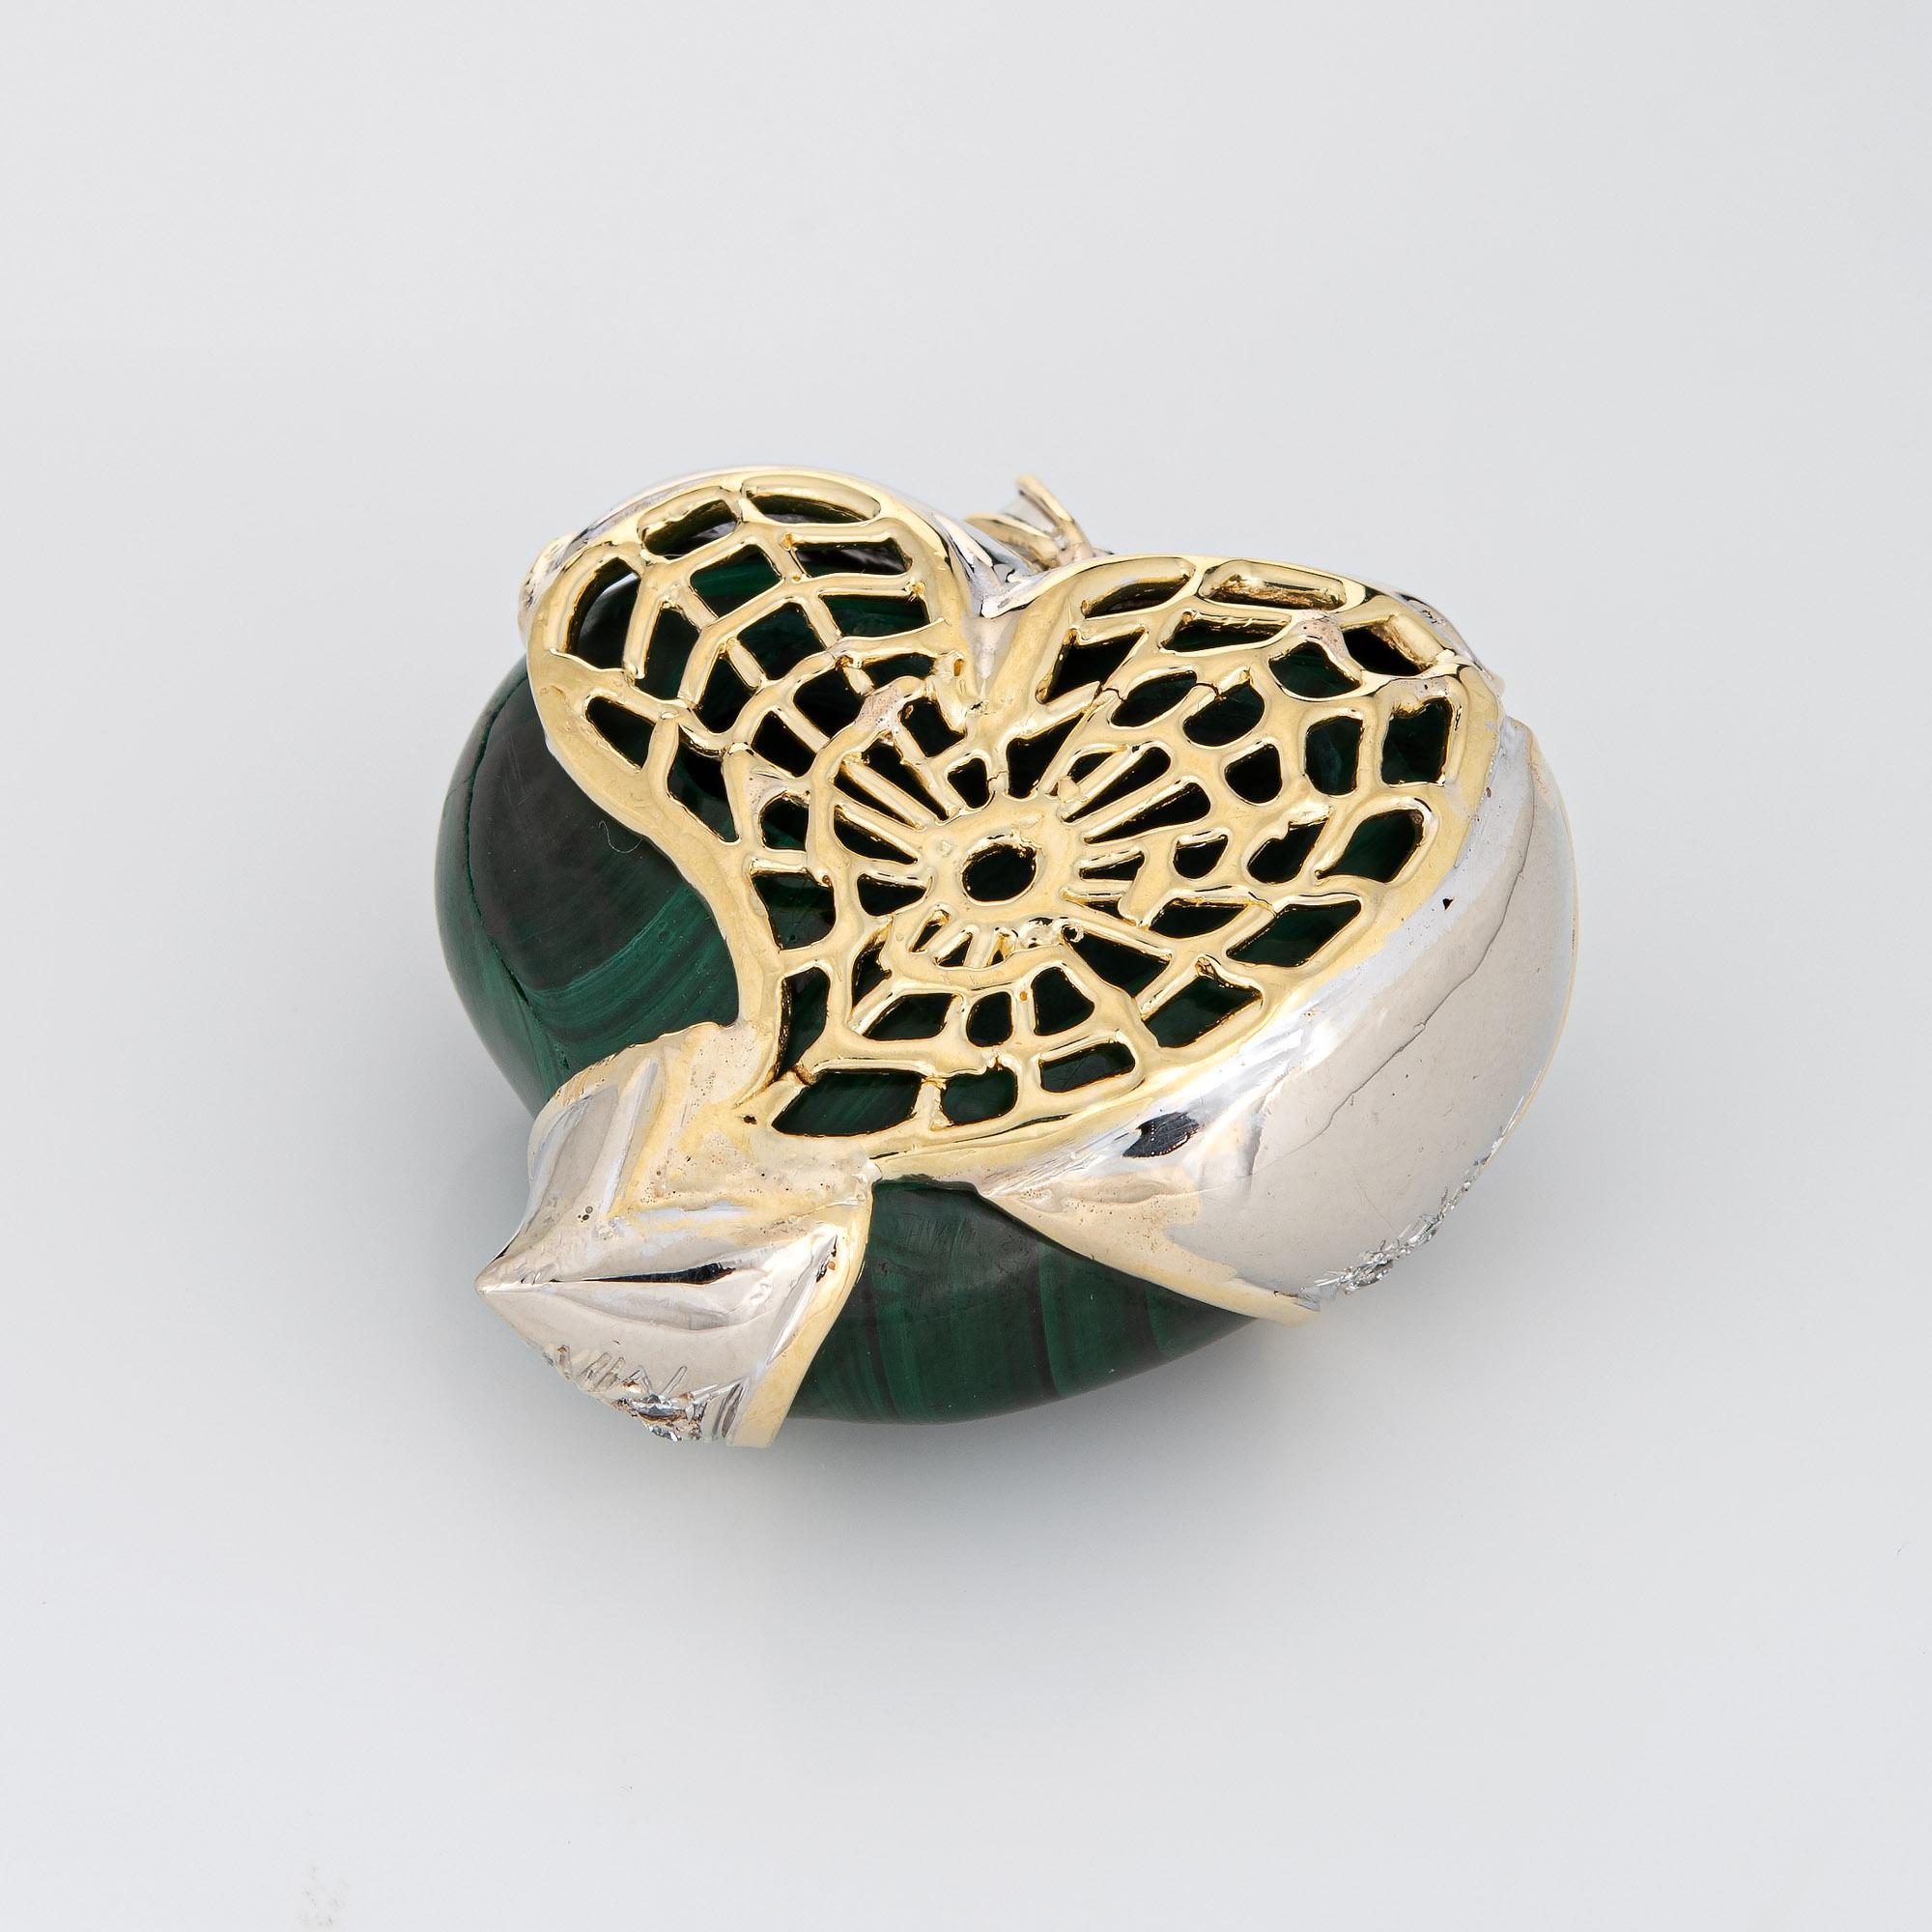 Finely detailed vintage puffed heart pendant crafted in 14k yellow gold (circa 1980s to 1990s).  

Malachite measures 40mm x 35mm, accented with an estimated 0.50 carats of diamonds (estimated at H-I color and VS2-SI2 clarity). The malachite is in